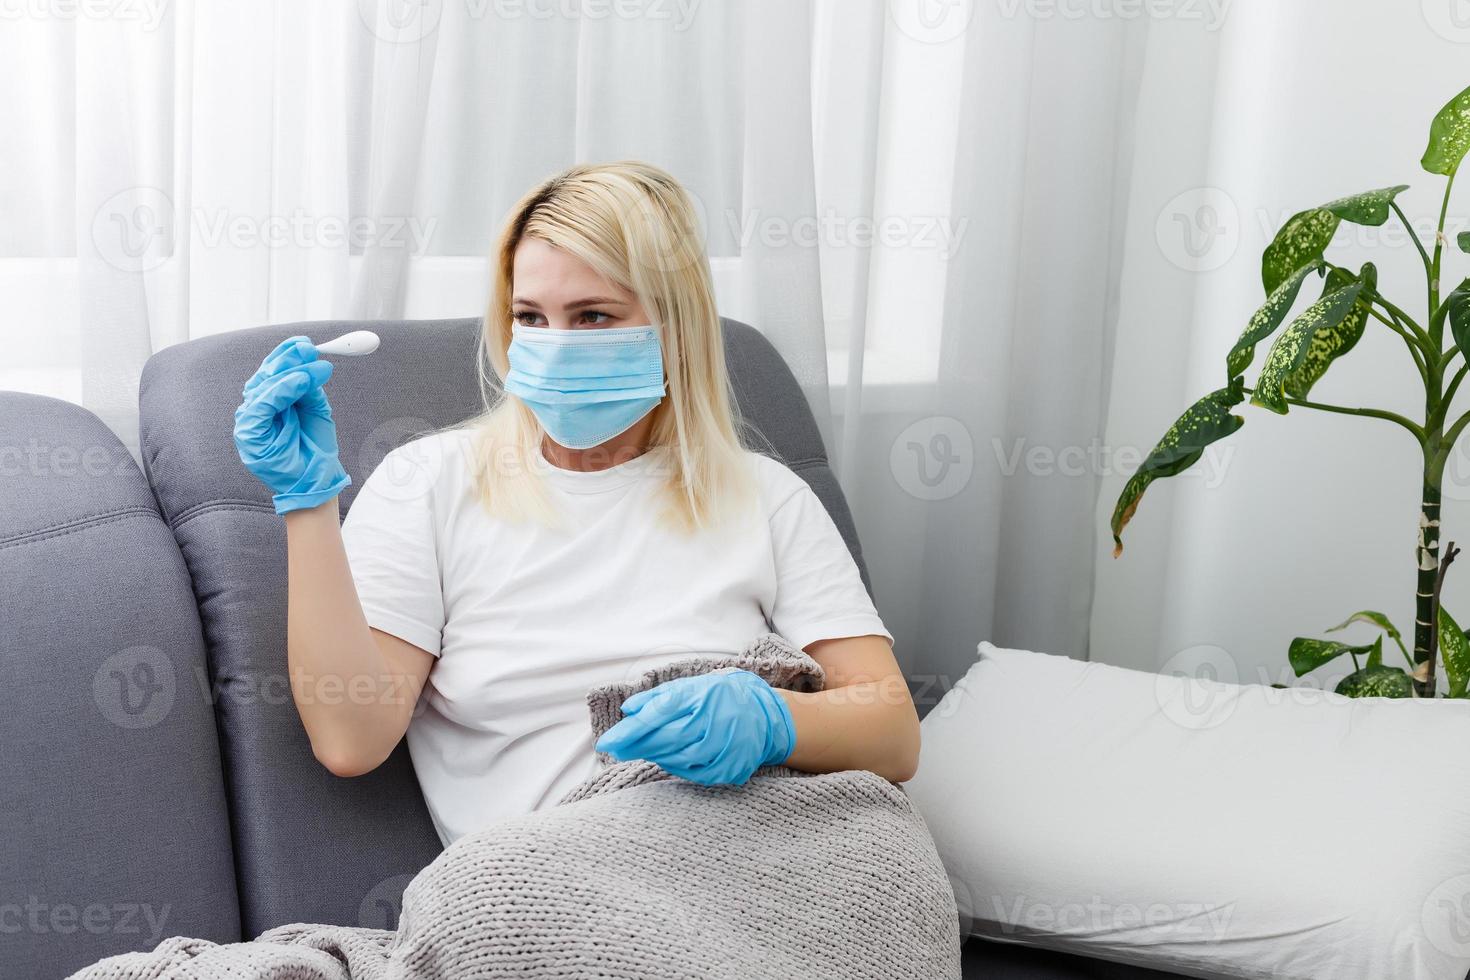 Fever and coronavirus symptoms, woman in medical mask measures body temperature. Sick girl looks at digital thermometer in her hands, concept of cold and flu photo